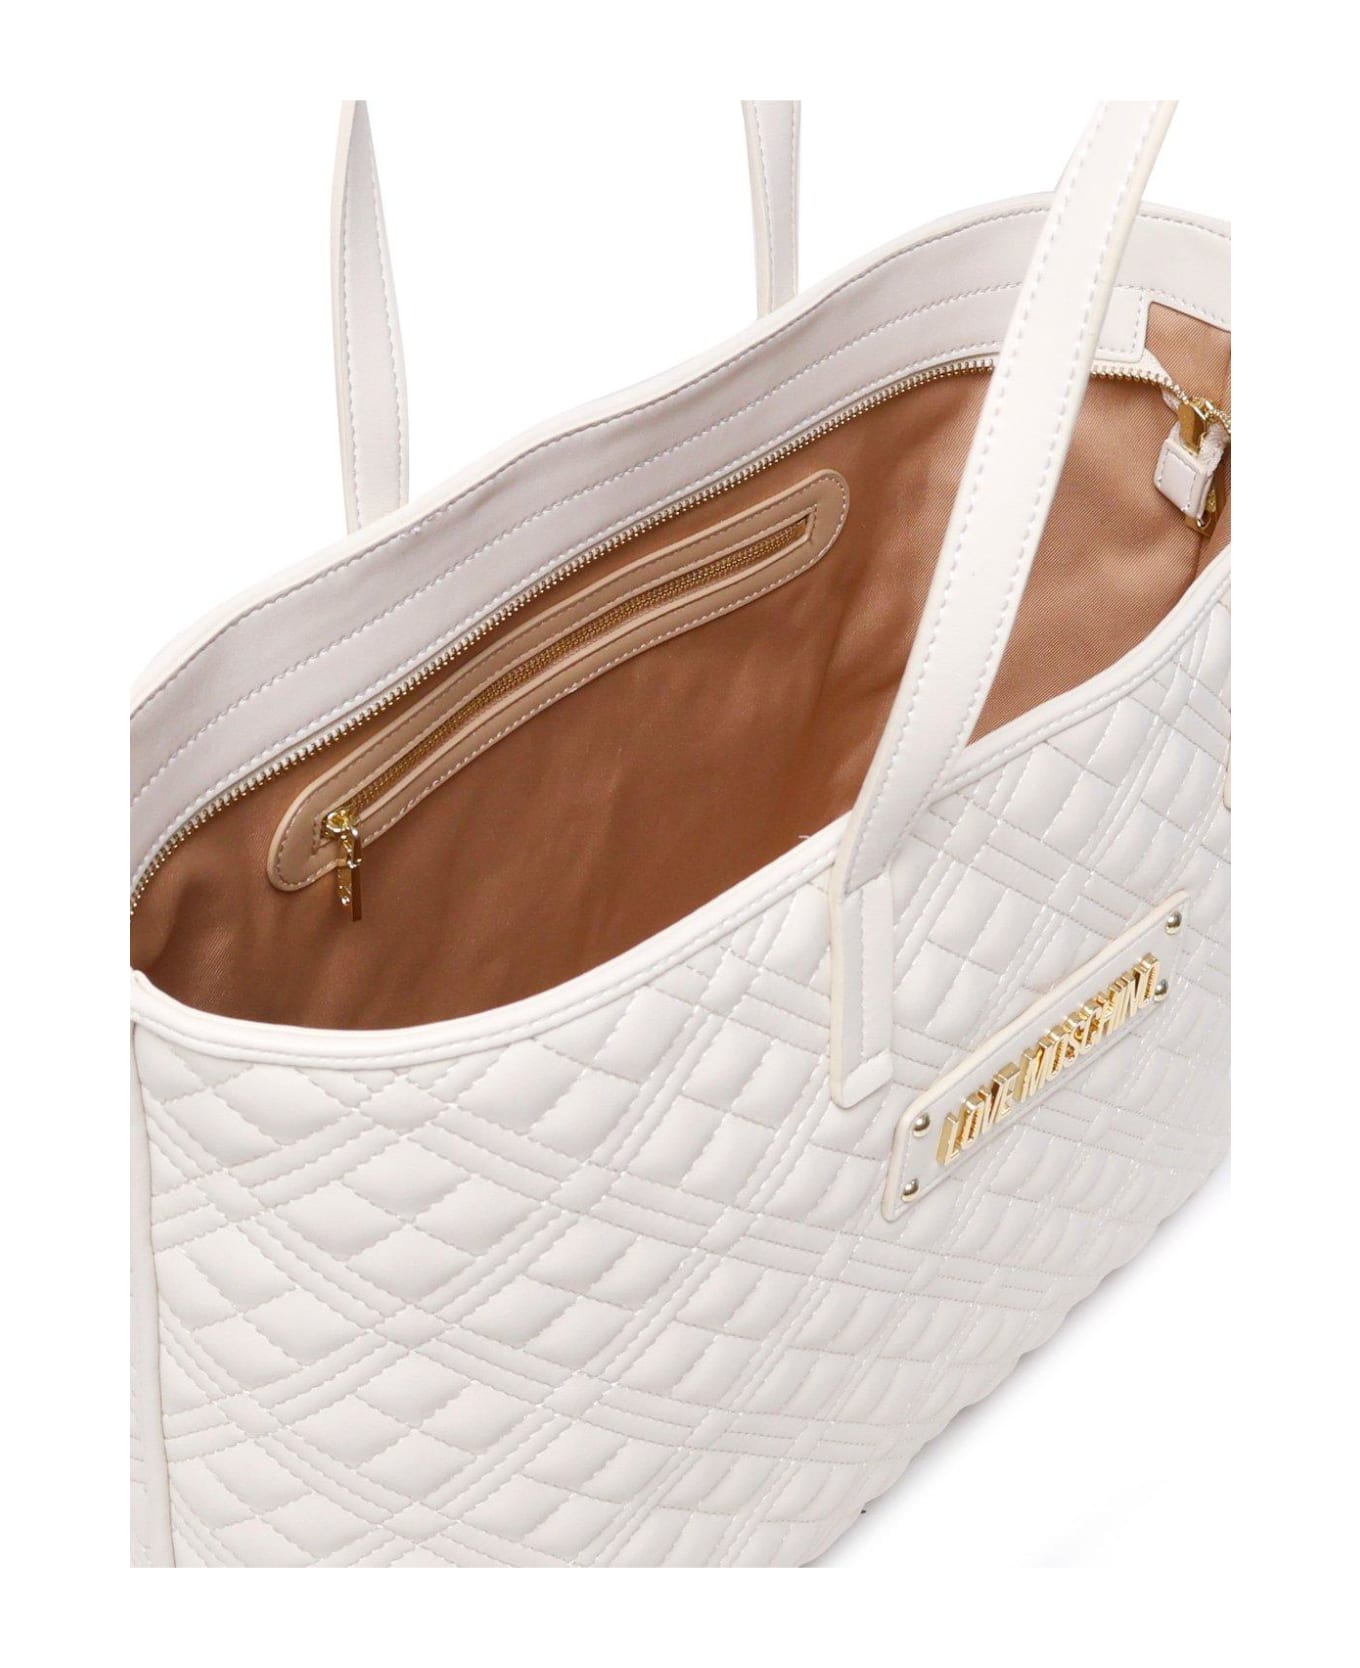 Love Moschino Logo Lettering Quilted Top Handle Bag - Ivory